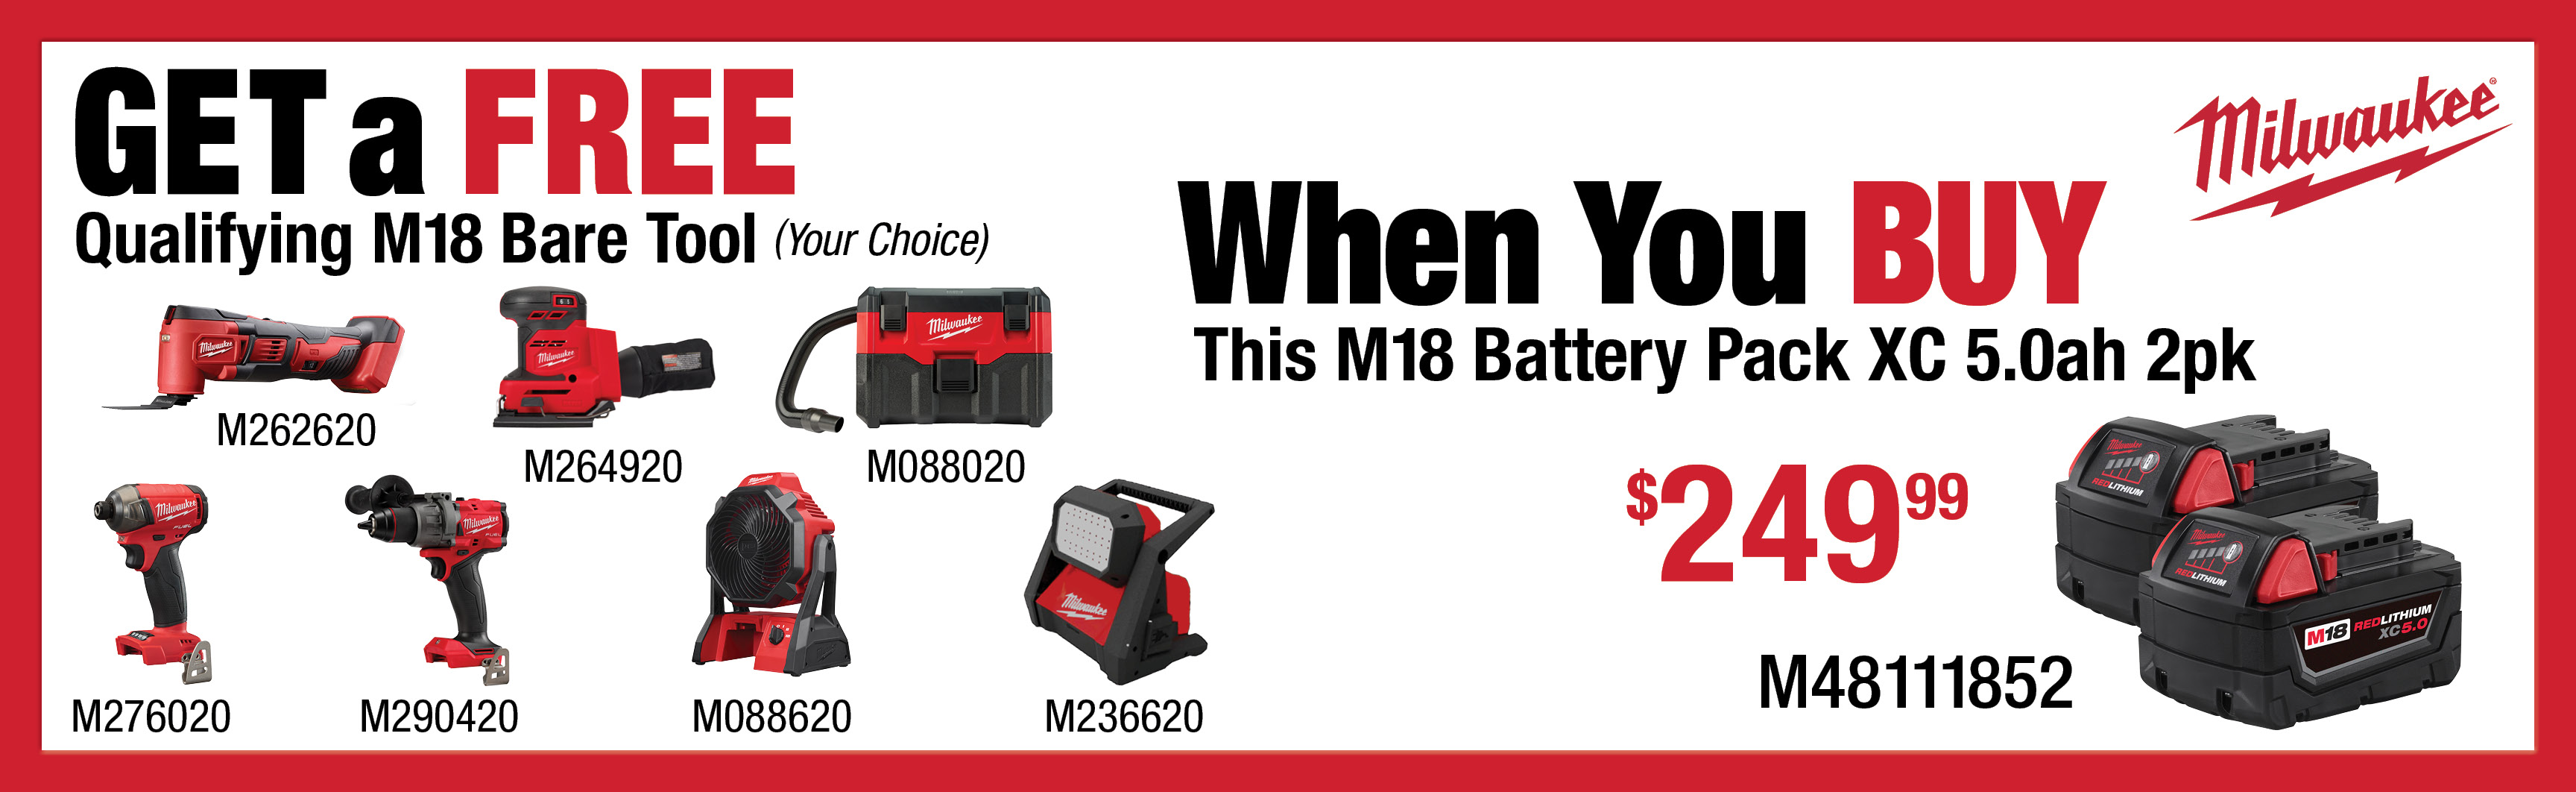 Milwaukee May - July: Buy a M48111852 M18 2pk Battery Pack and get a FREE M18 Bare Tool